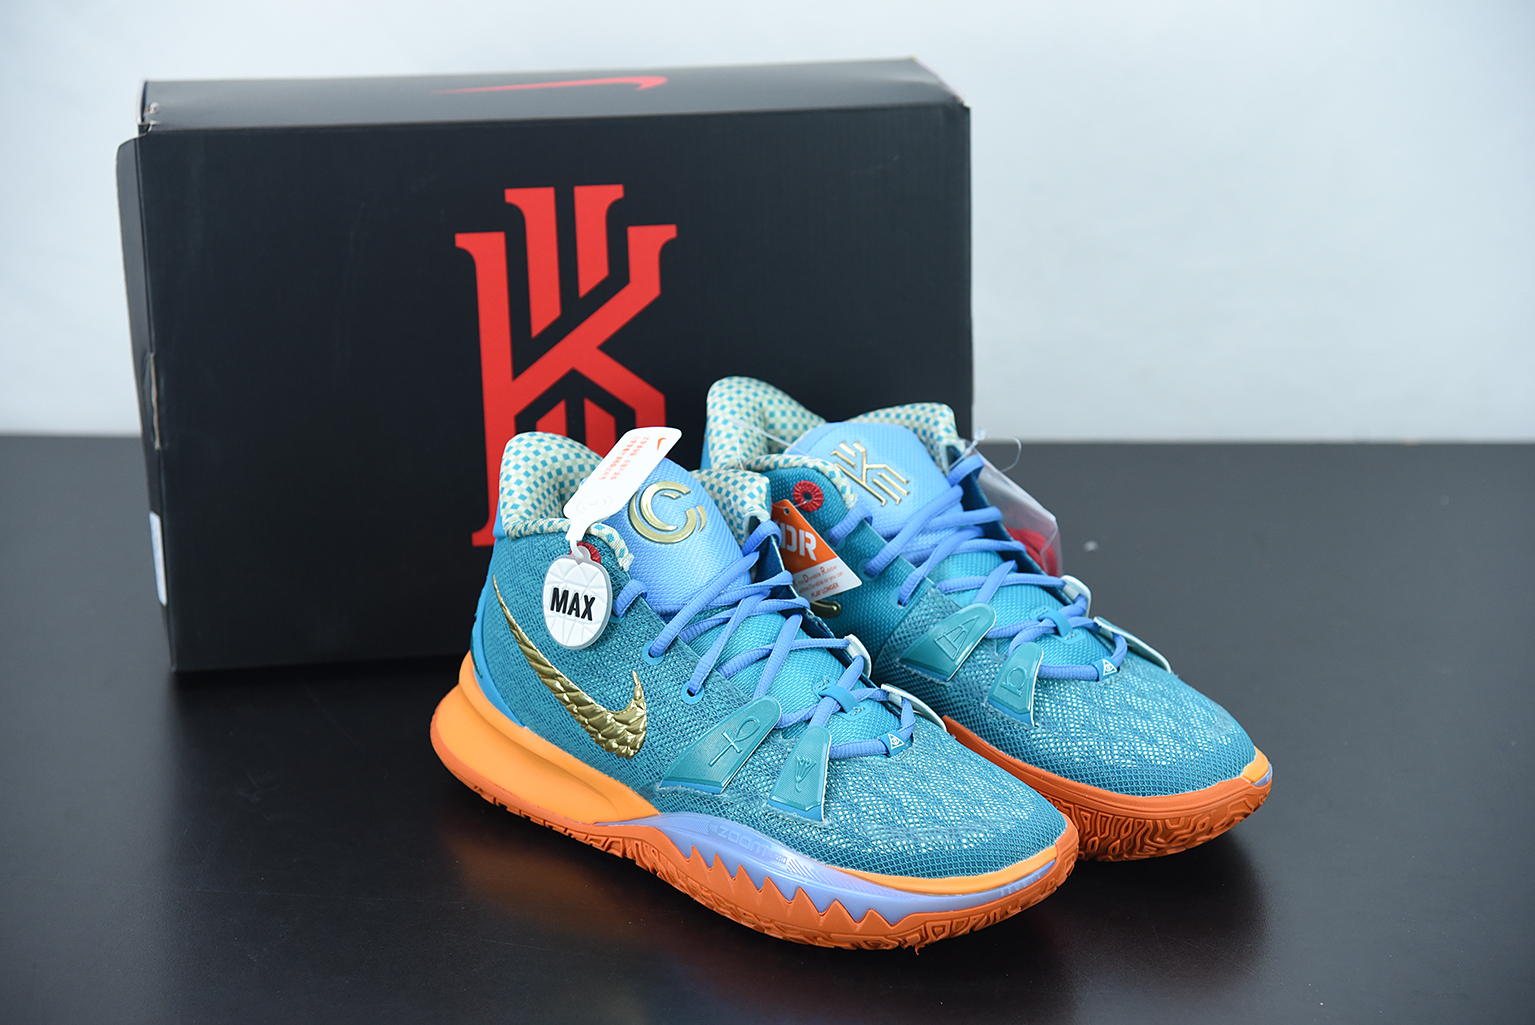 nike superfly 3 turquise red gold shoes girls - Orange Concepts nike cheer flash sneakers for women 2017 Teal Blue/Light Blue - Metallic Gold – HotelomegaShops